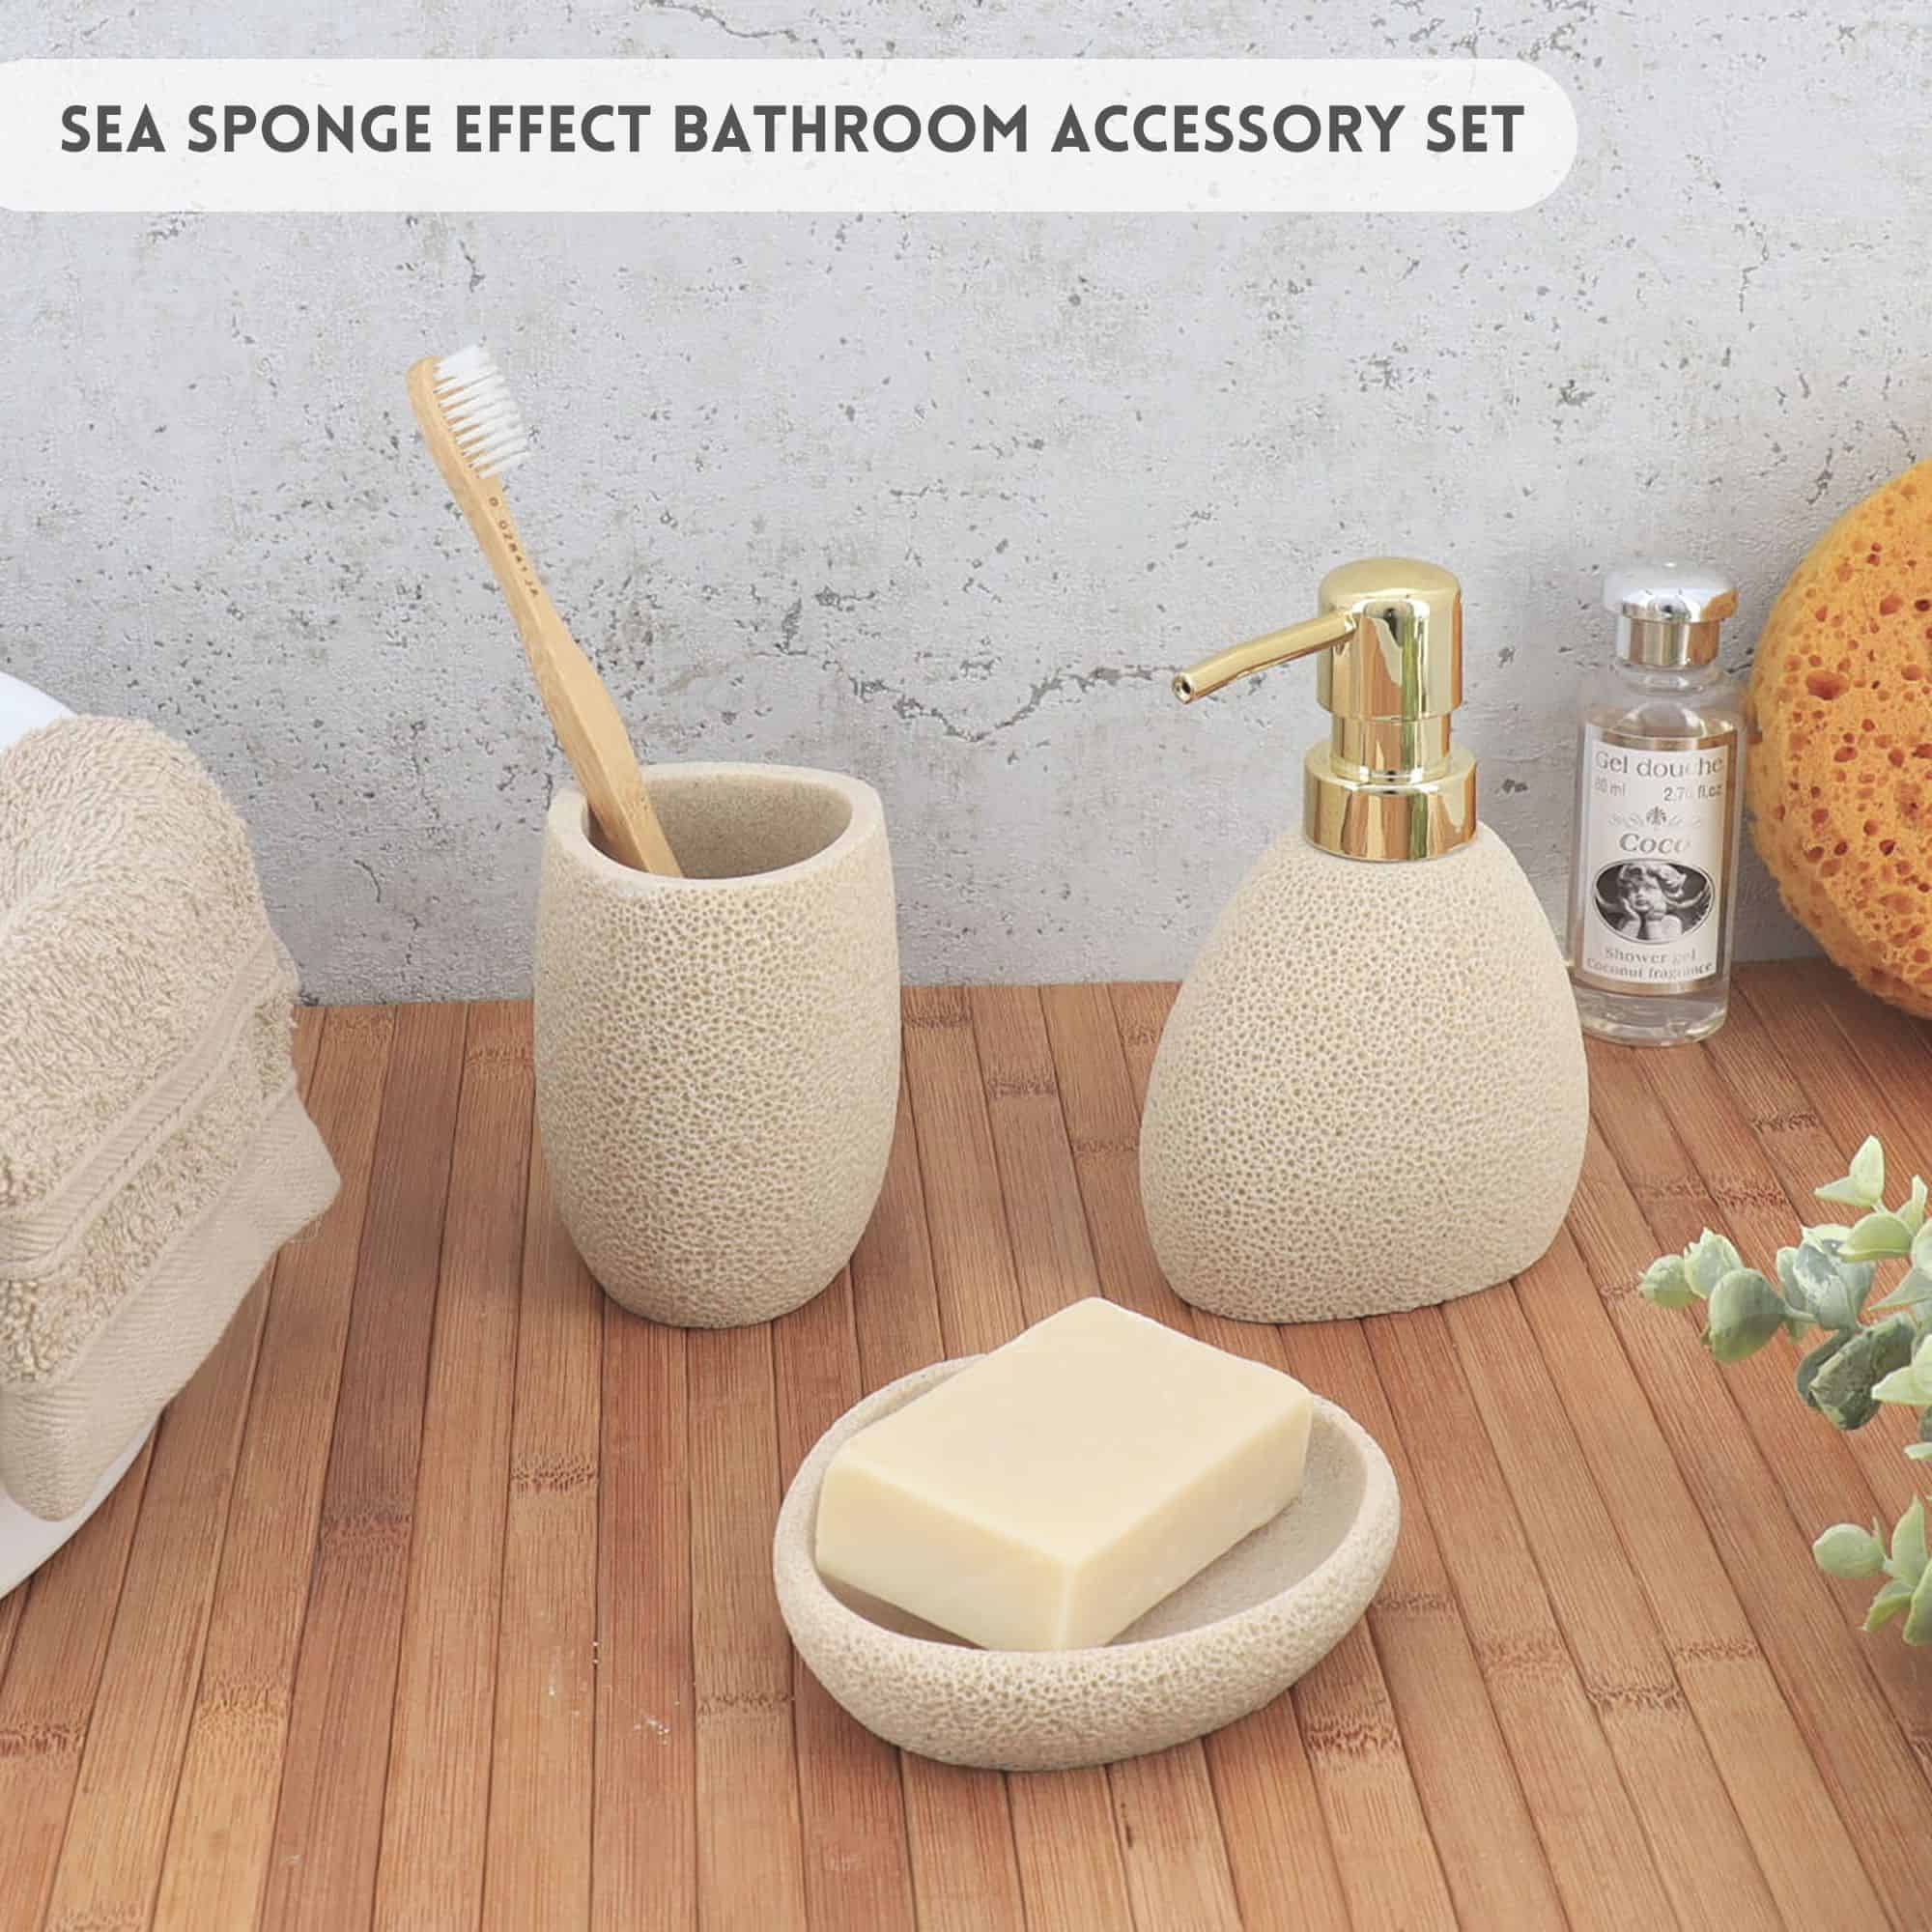 Toothbrush holder, soap dispenser, and soap dish on a bathroom countertop